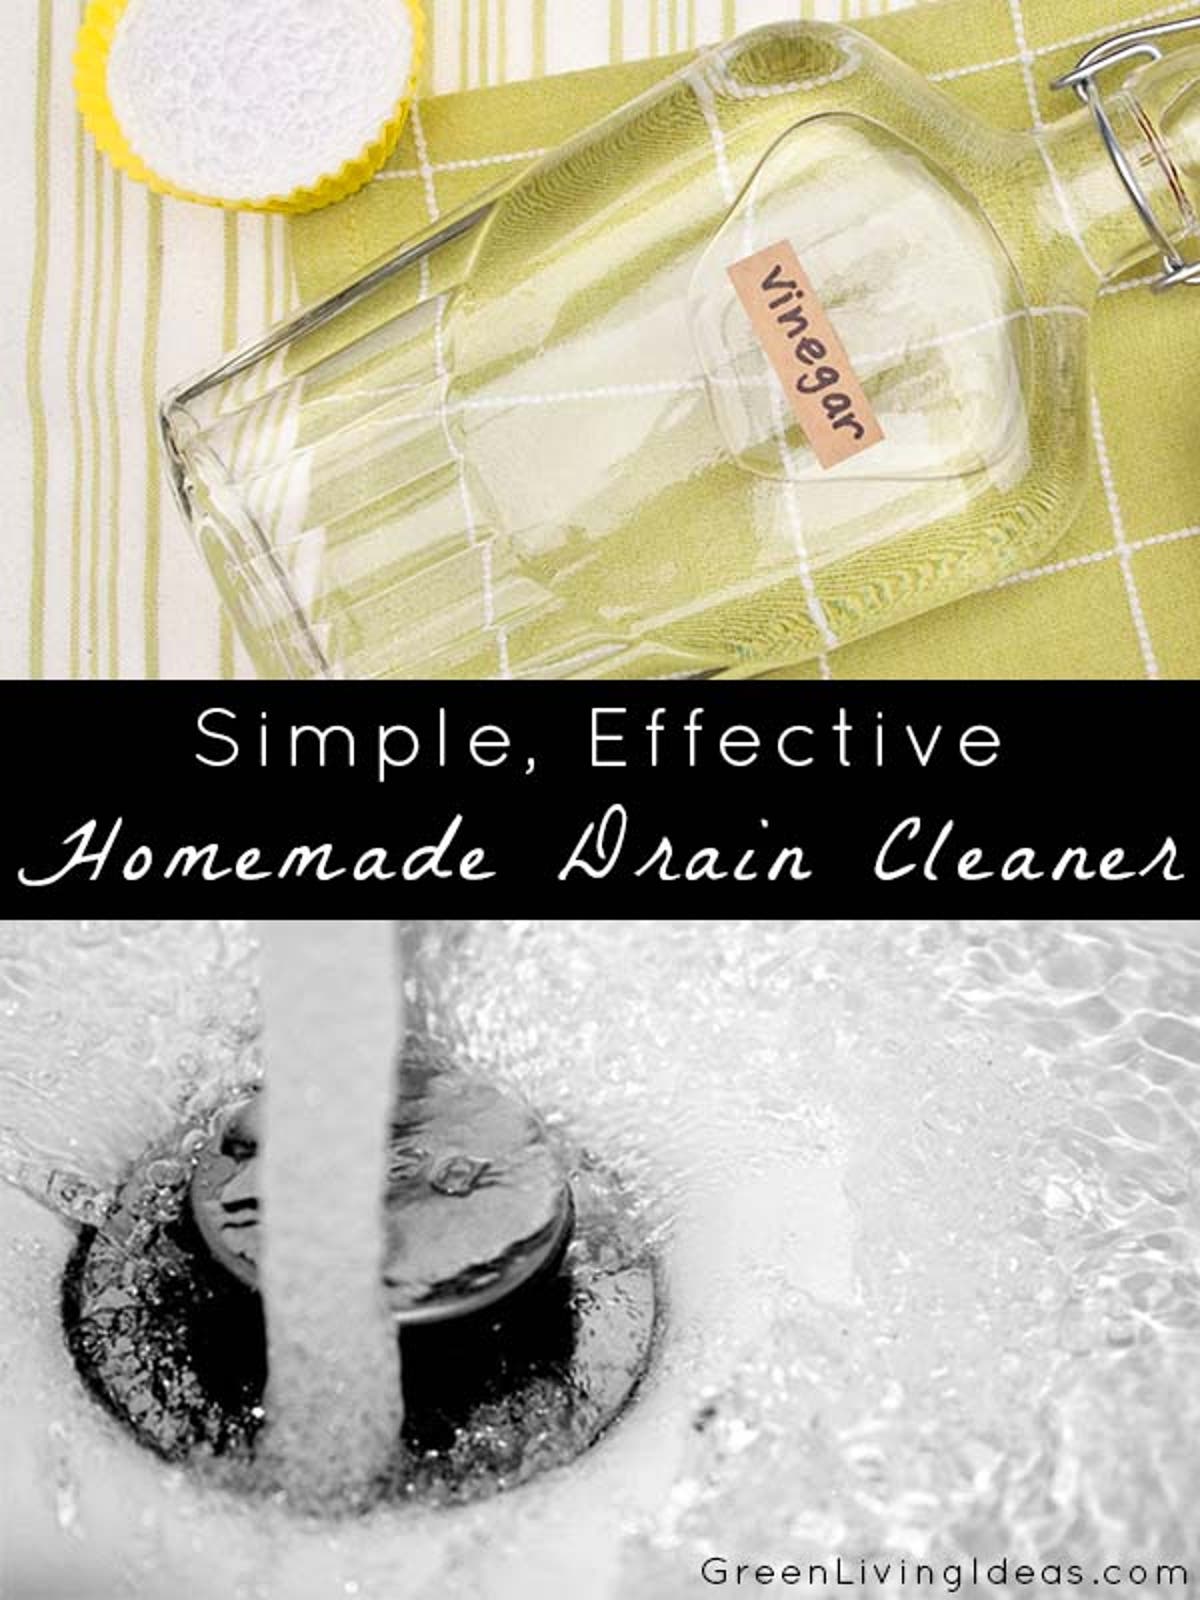 Homemade Drain Cleaners: 4 Natural Recipes